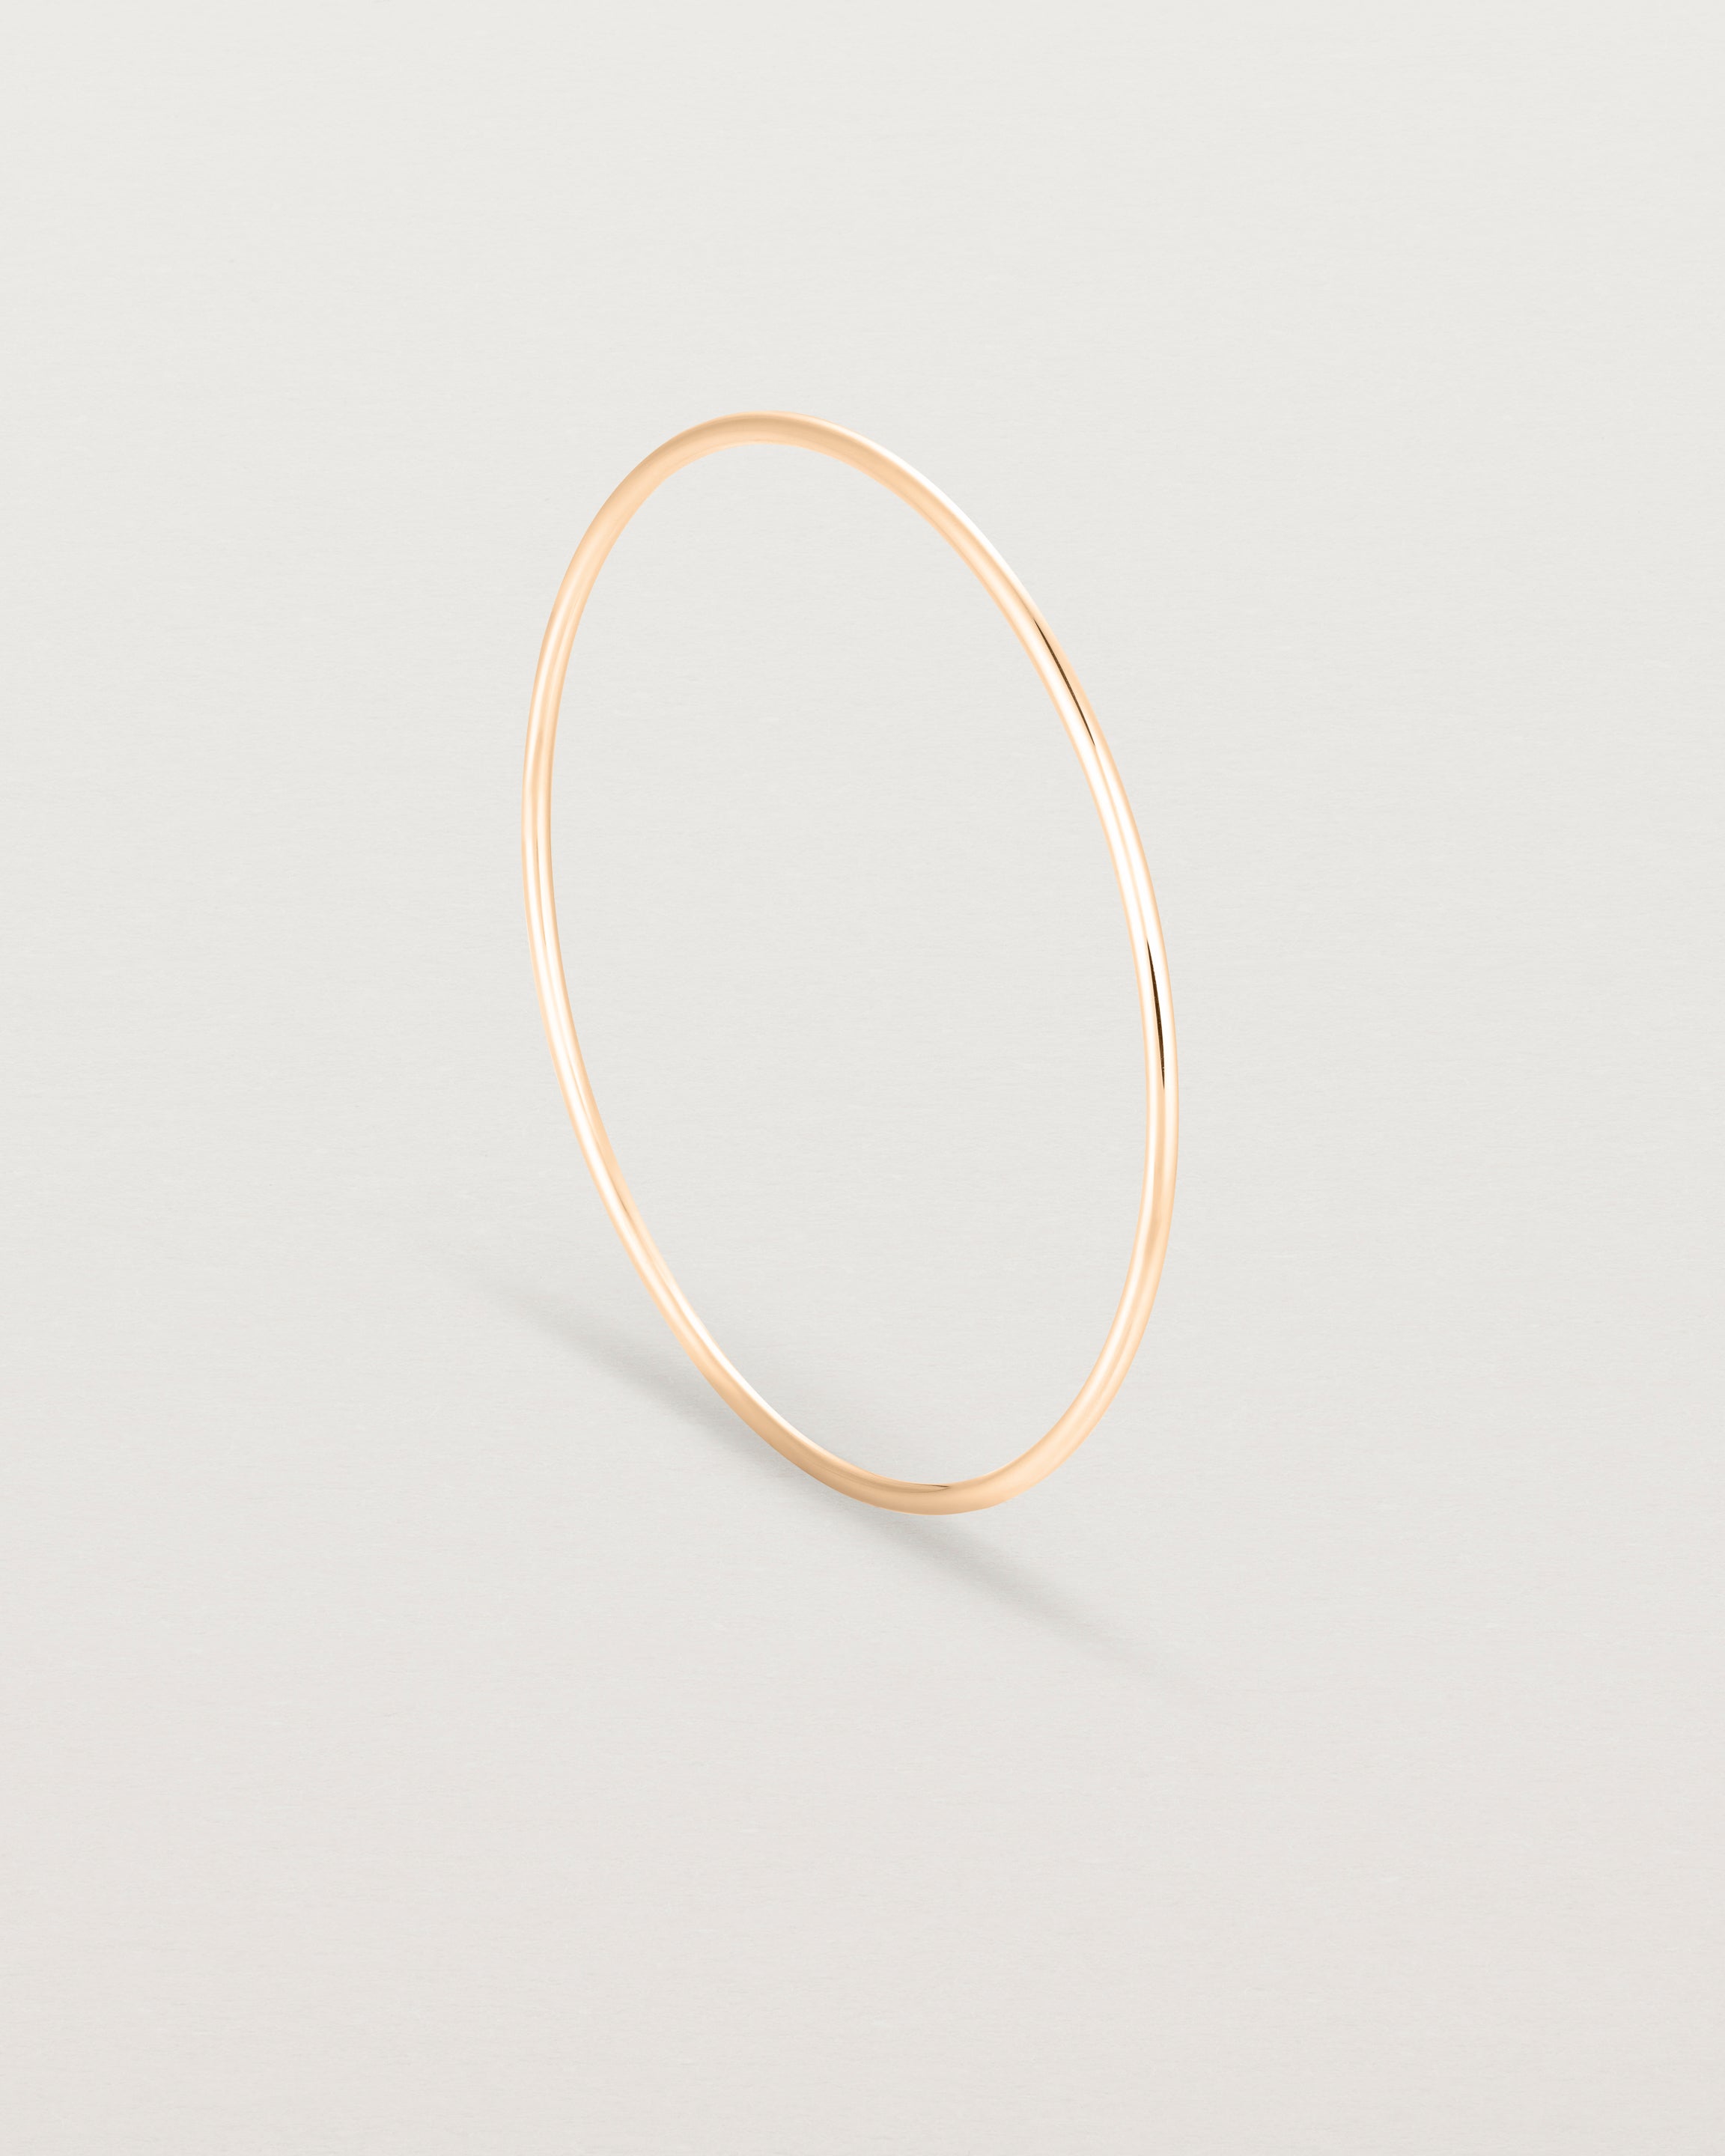 Standing view of the Oval Bangle in Rose Gold.